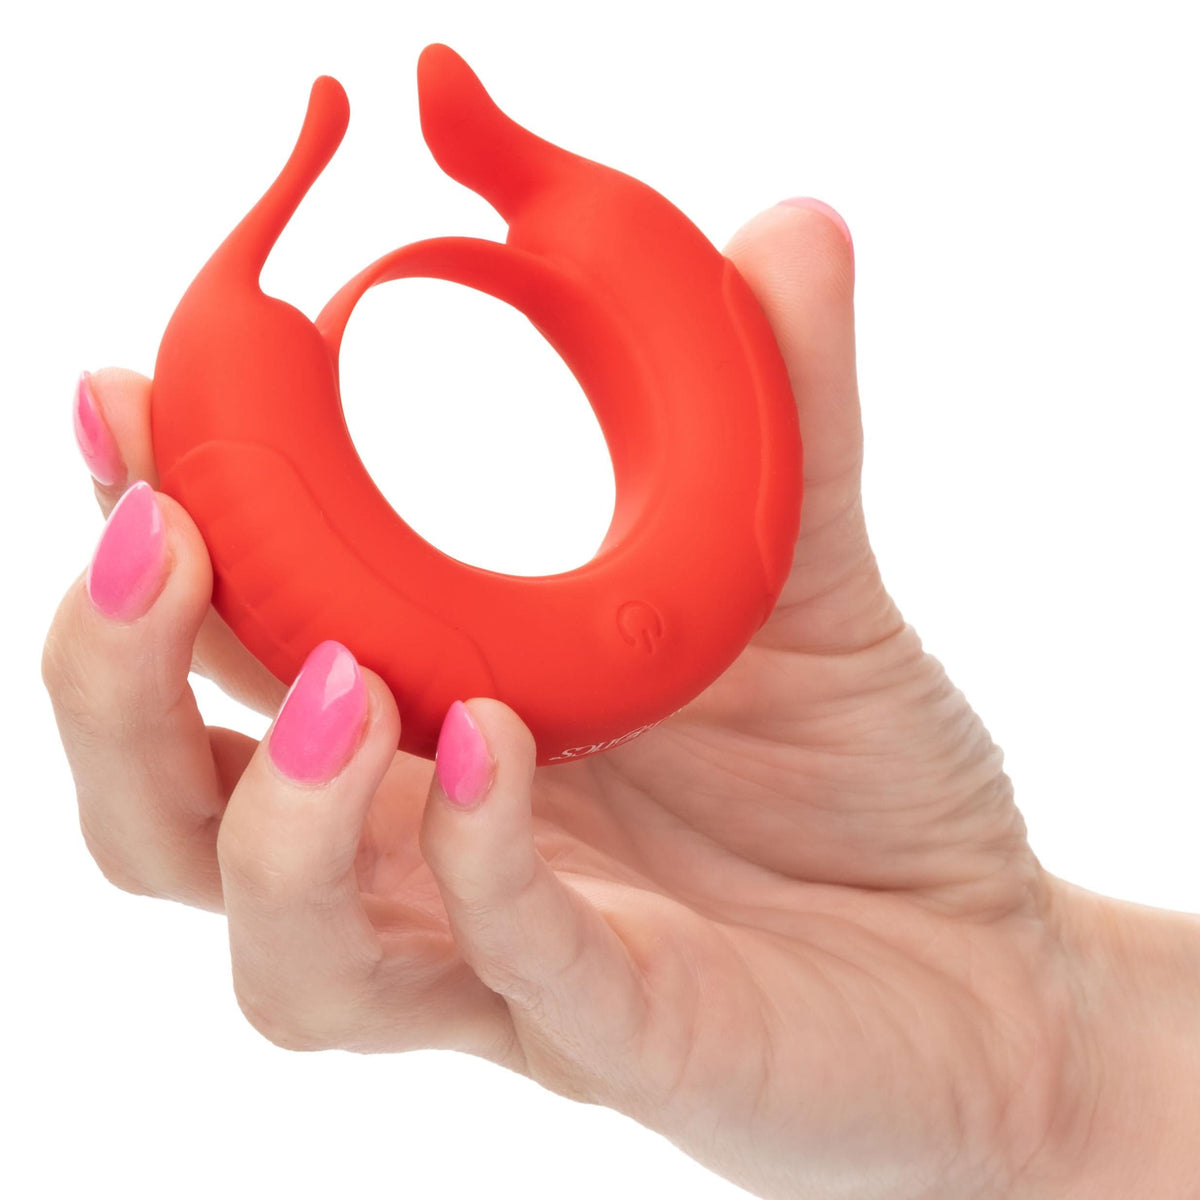 silicone rechargeable taurus enhancer red